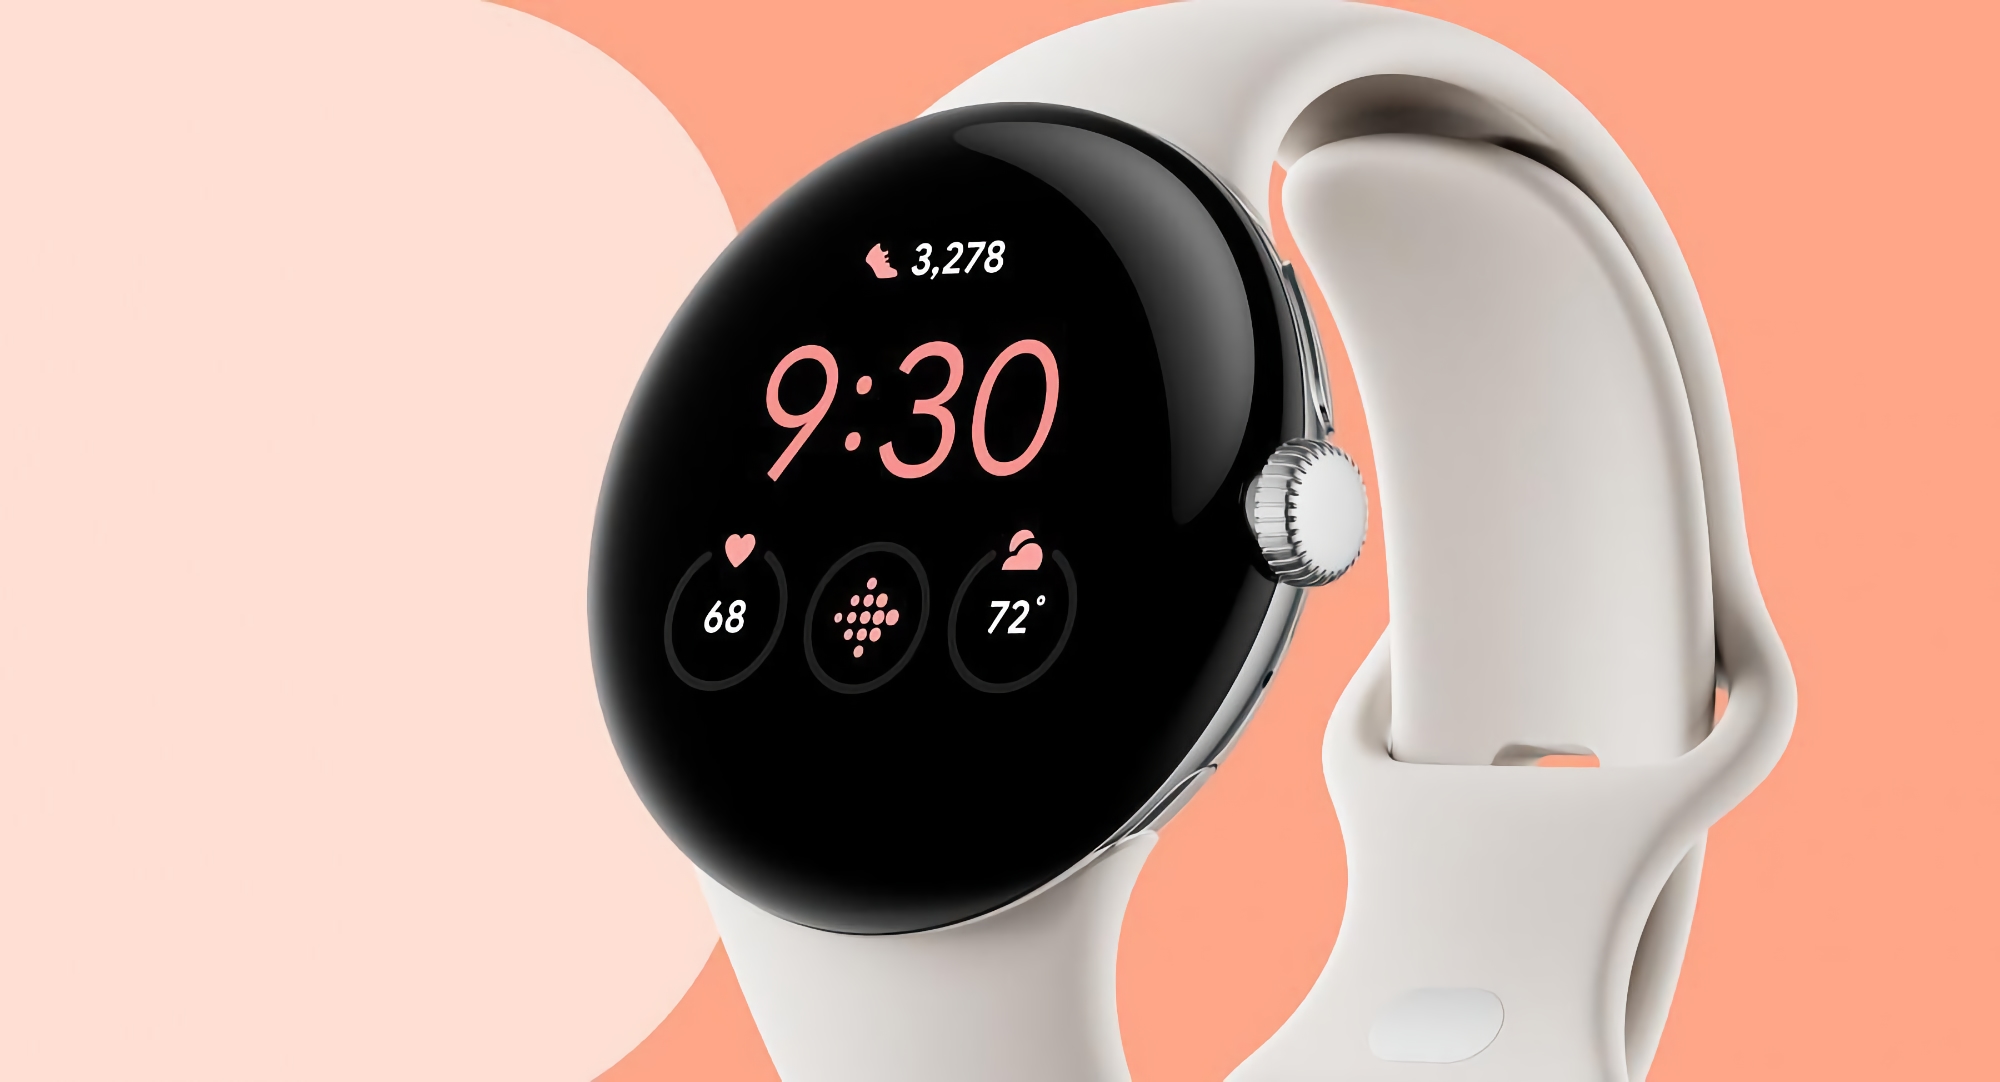 Round display, one control button and special mounts for straps: Google teasers smartwatch Pixel Watch